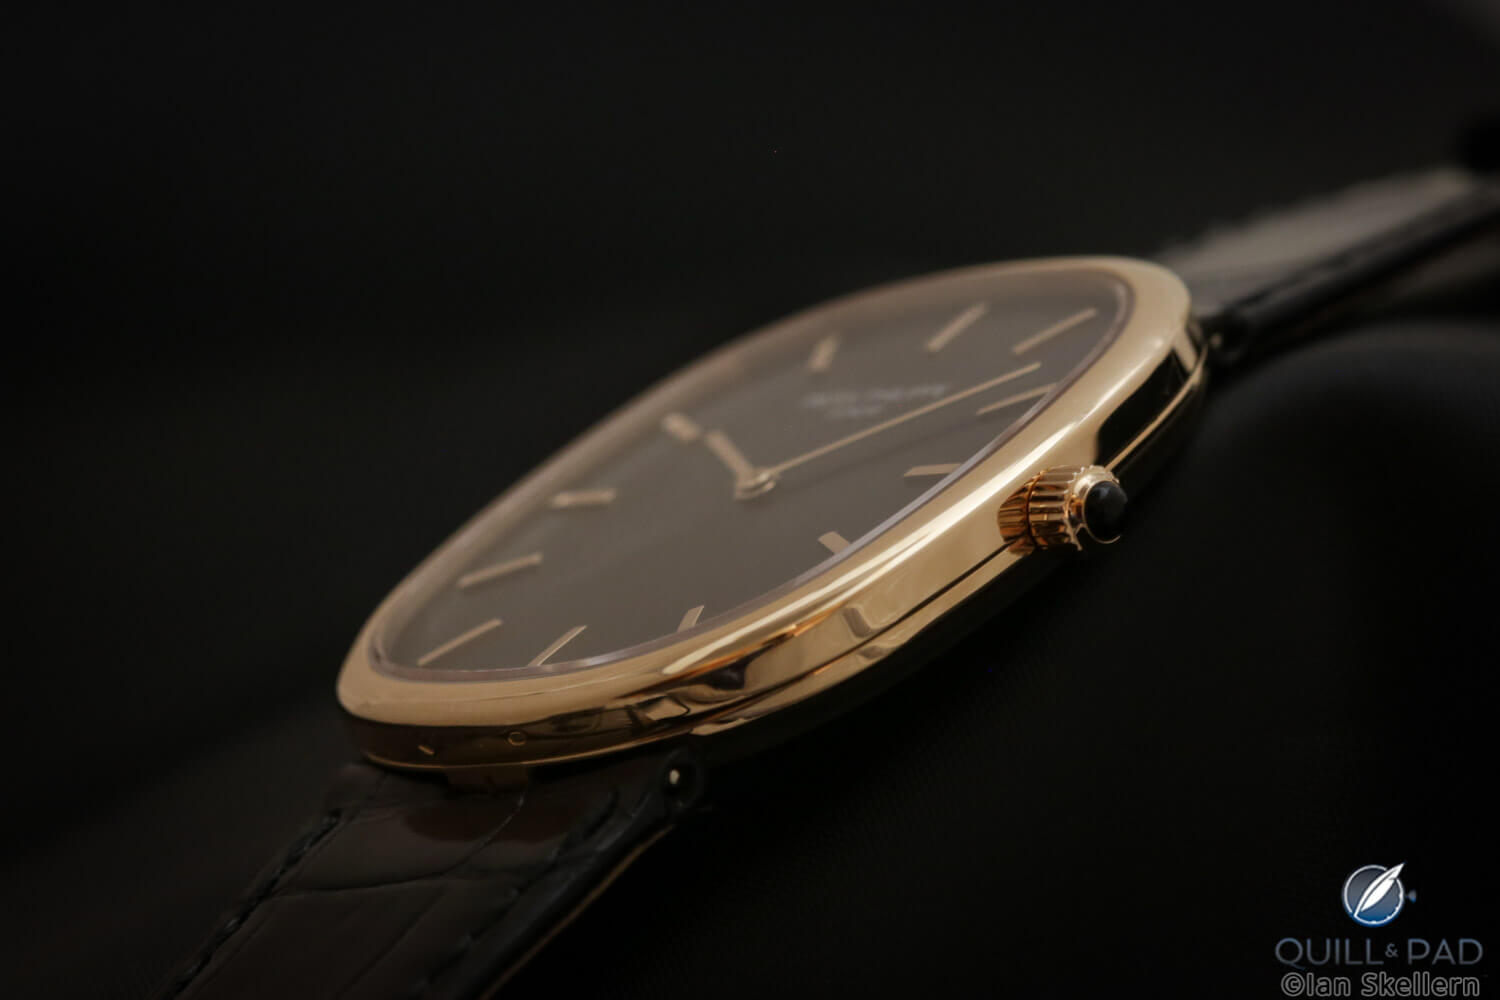 There's slim then there's ultra slim, the Patek Philippe Golden Ellipse